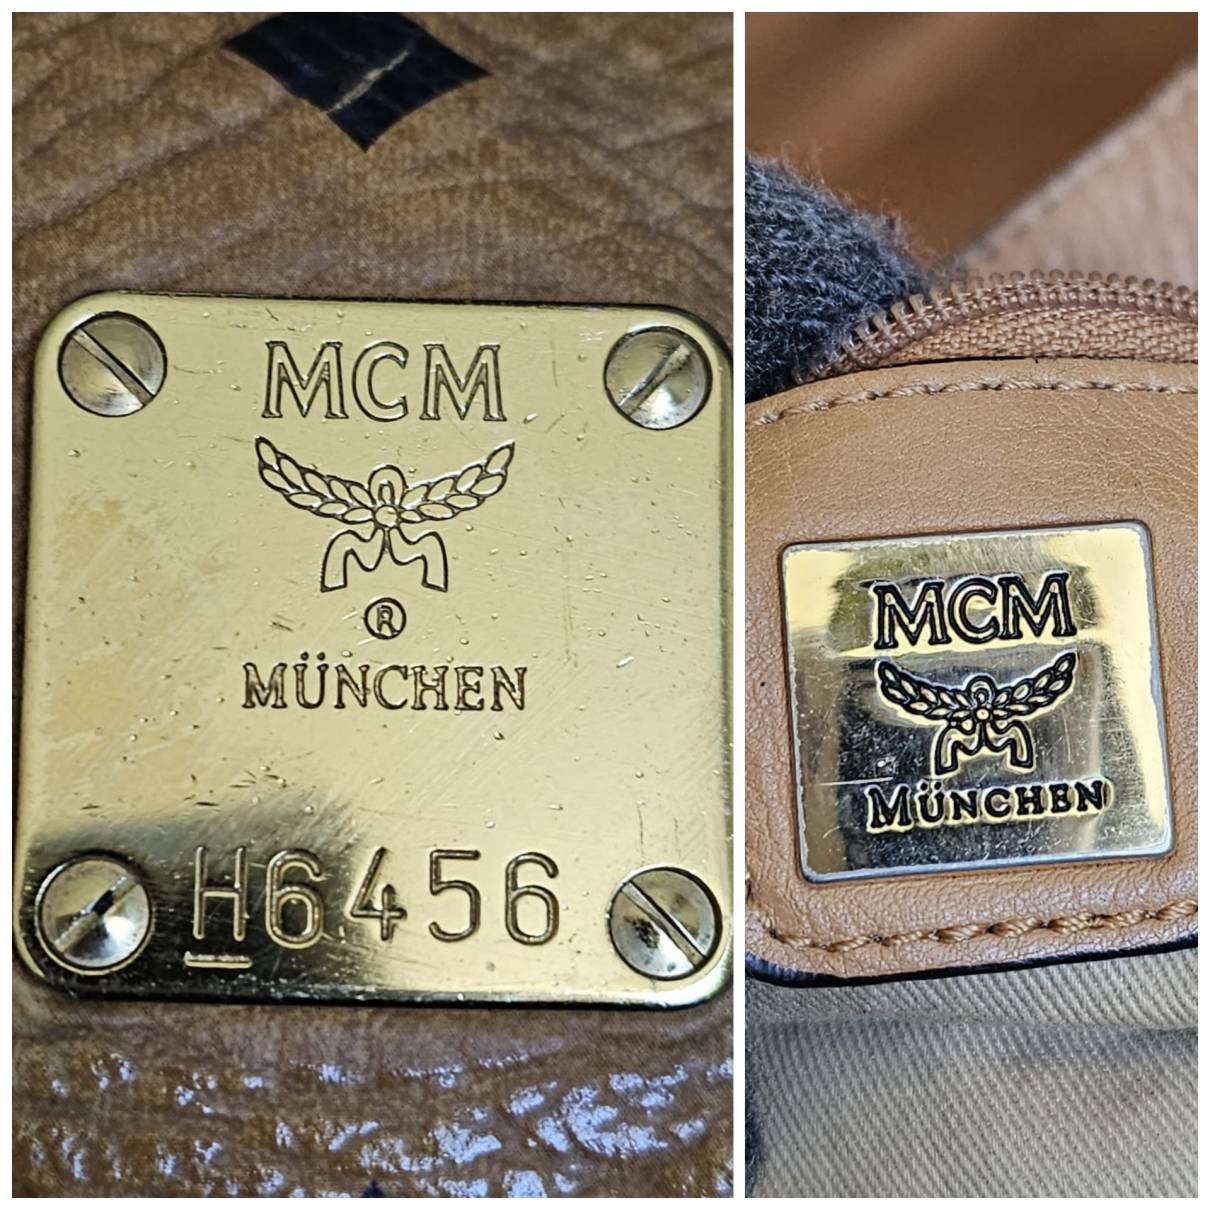 How to spot the MCM bag REAL vs FAKE !